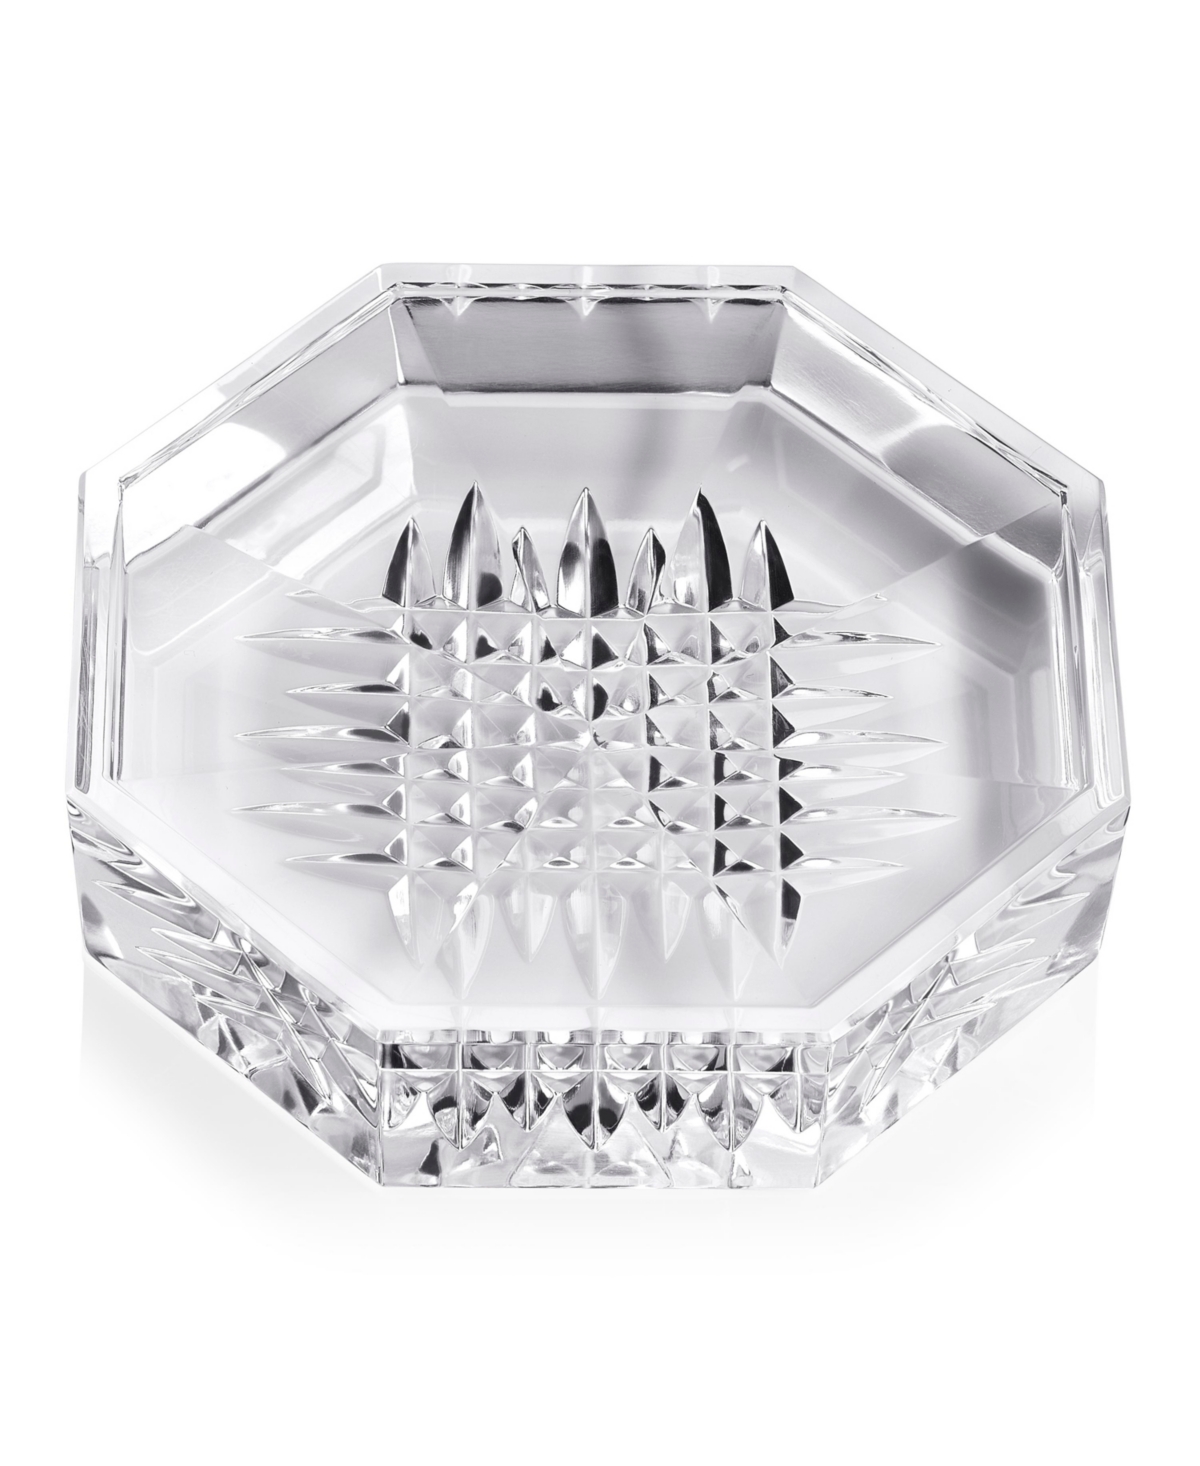 Waterford Lismore Diamond Decorative Tray, 4" In Clear